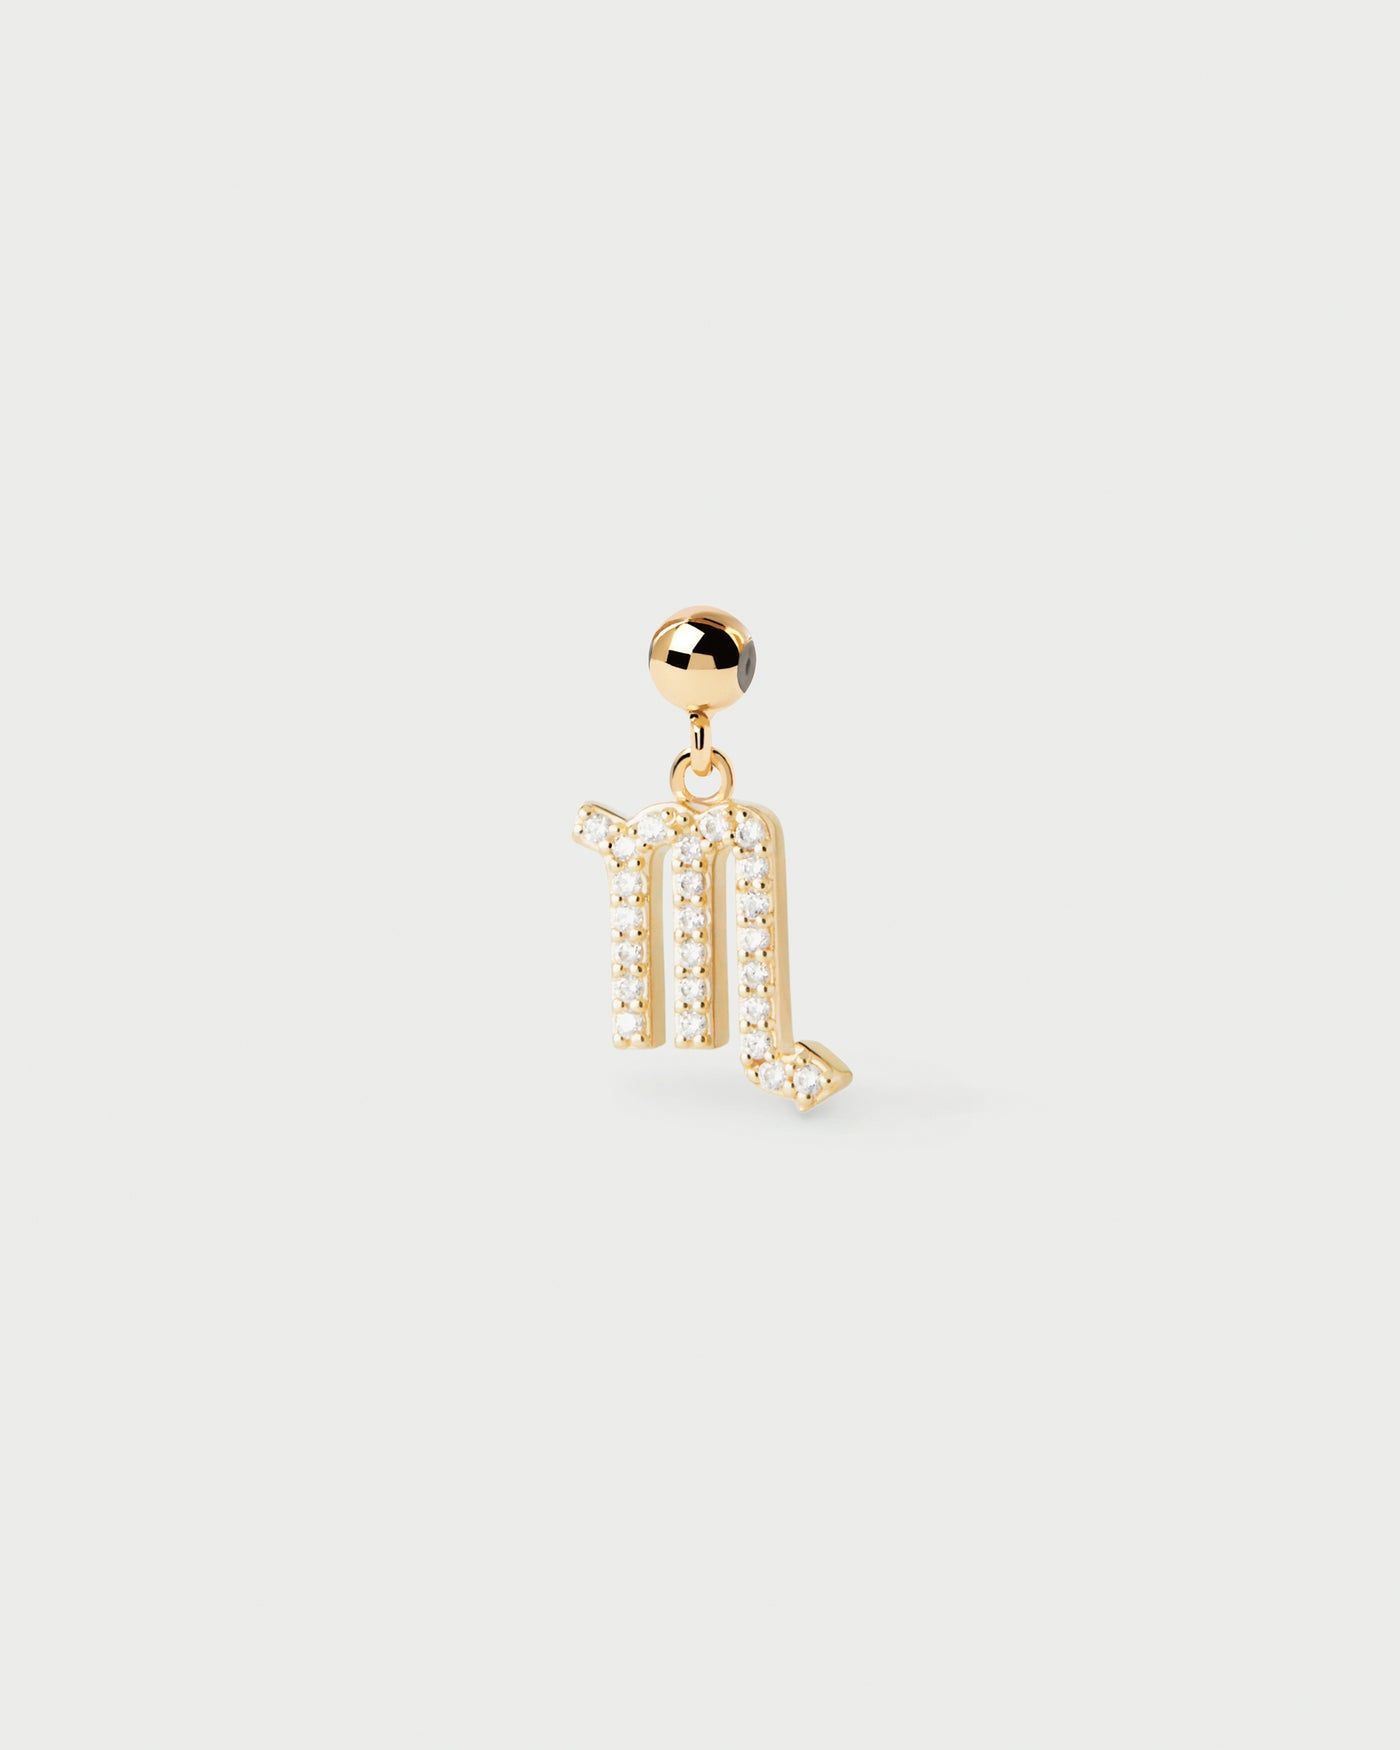 Scorpio Zodiac Charm Scorpio zodiac sign charm adorned with white zirconia to customize necklace or bracelet . Get the latest arrival from PDPAOLA. Place your order safely and get this Best Seller. Free Shipping.